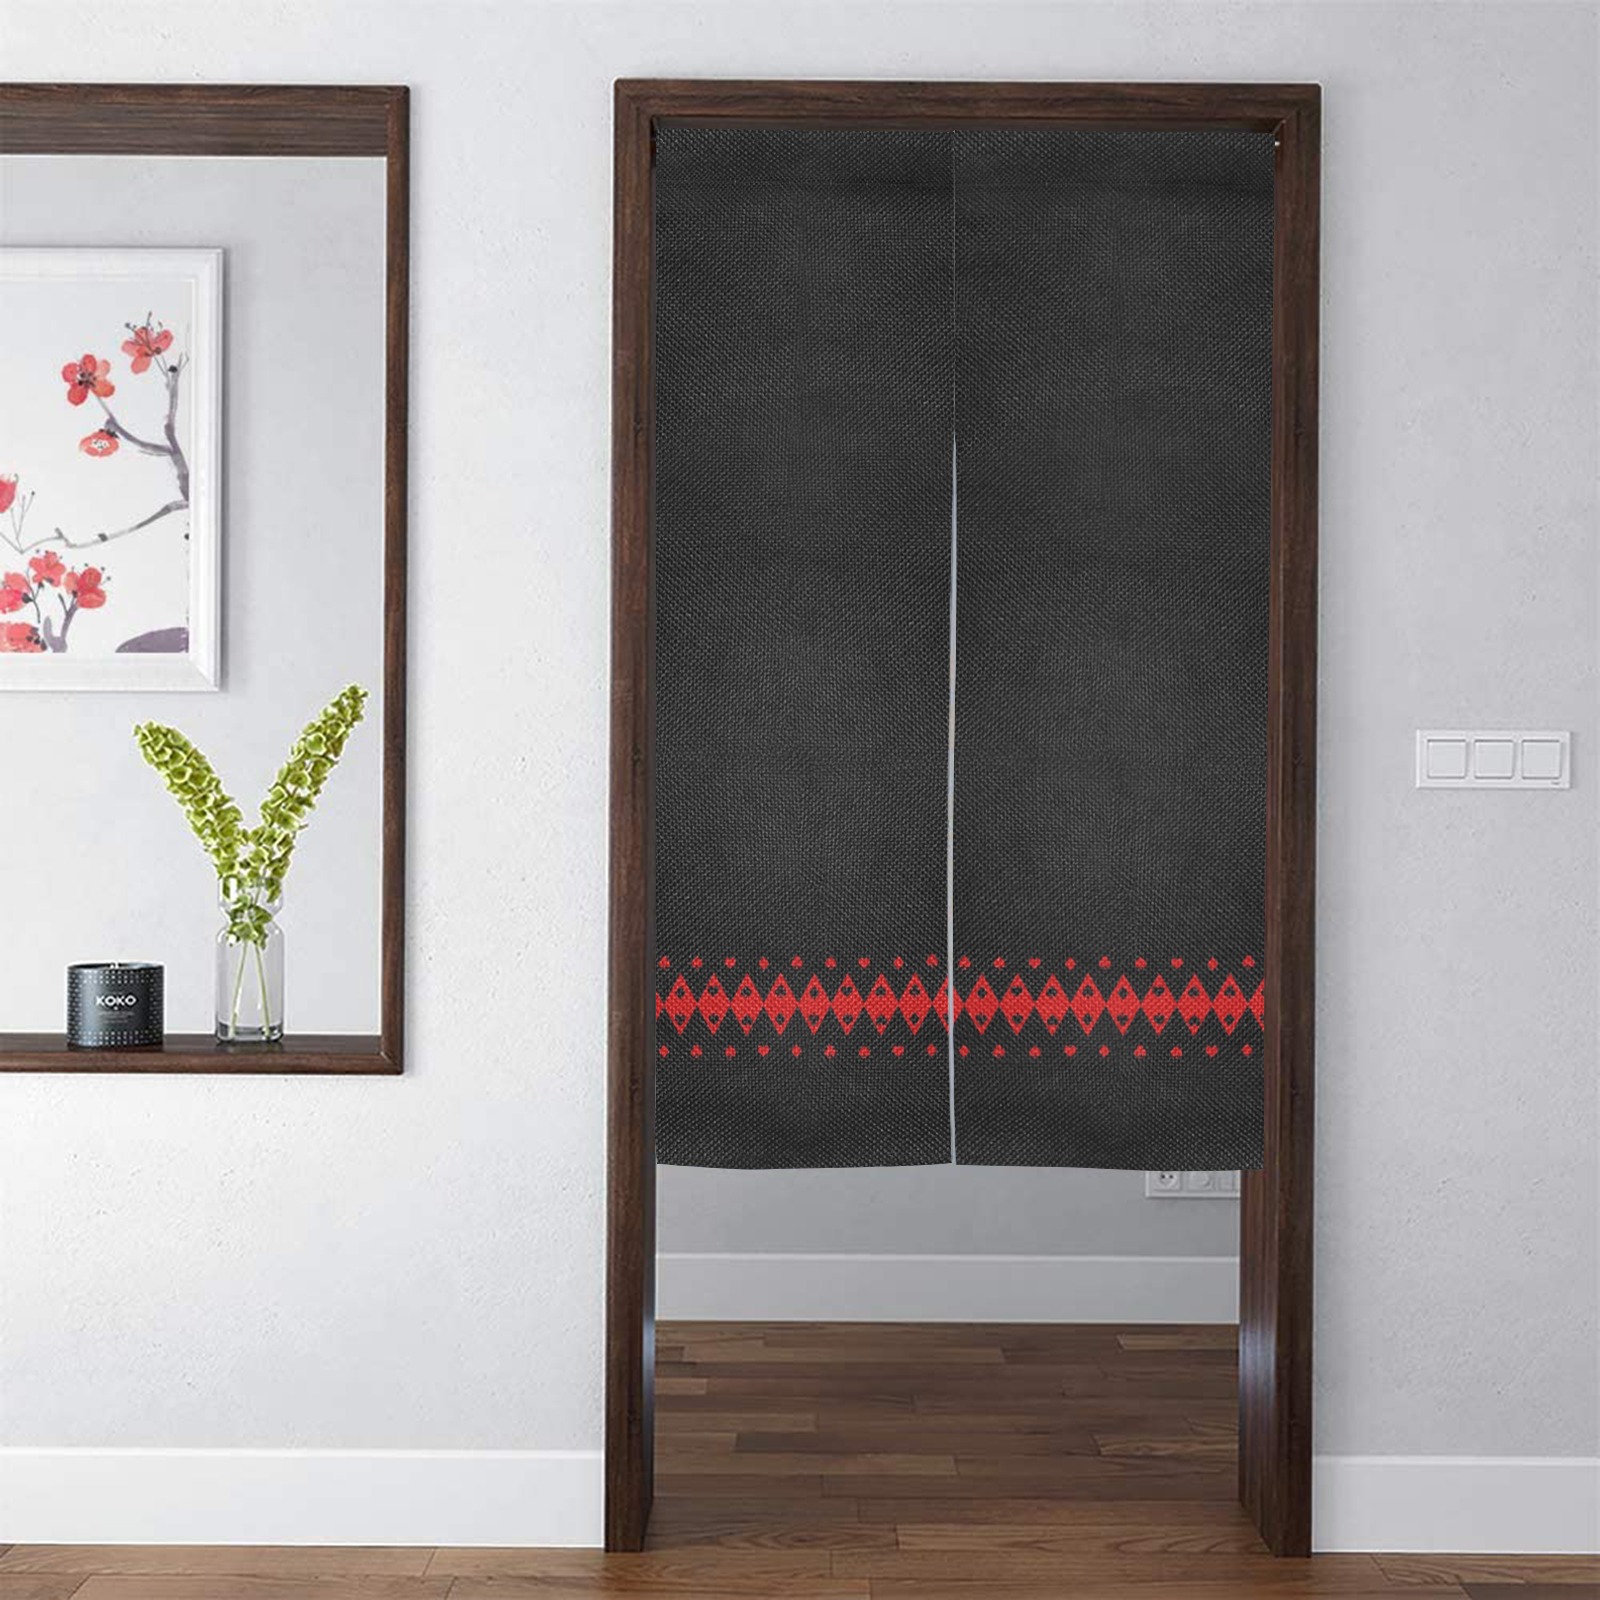 Black and Red Playing Card Shapes Door Curtain Tapestry